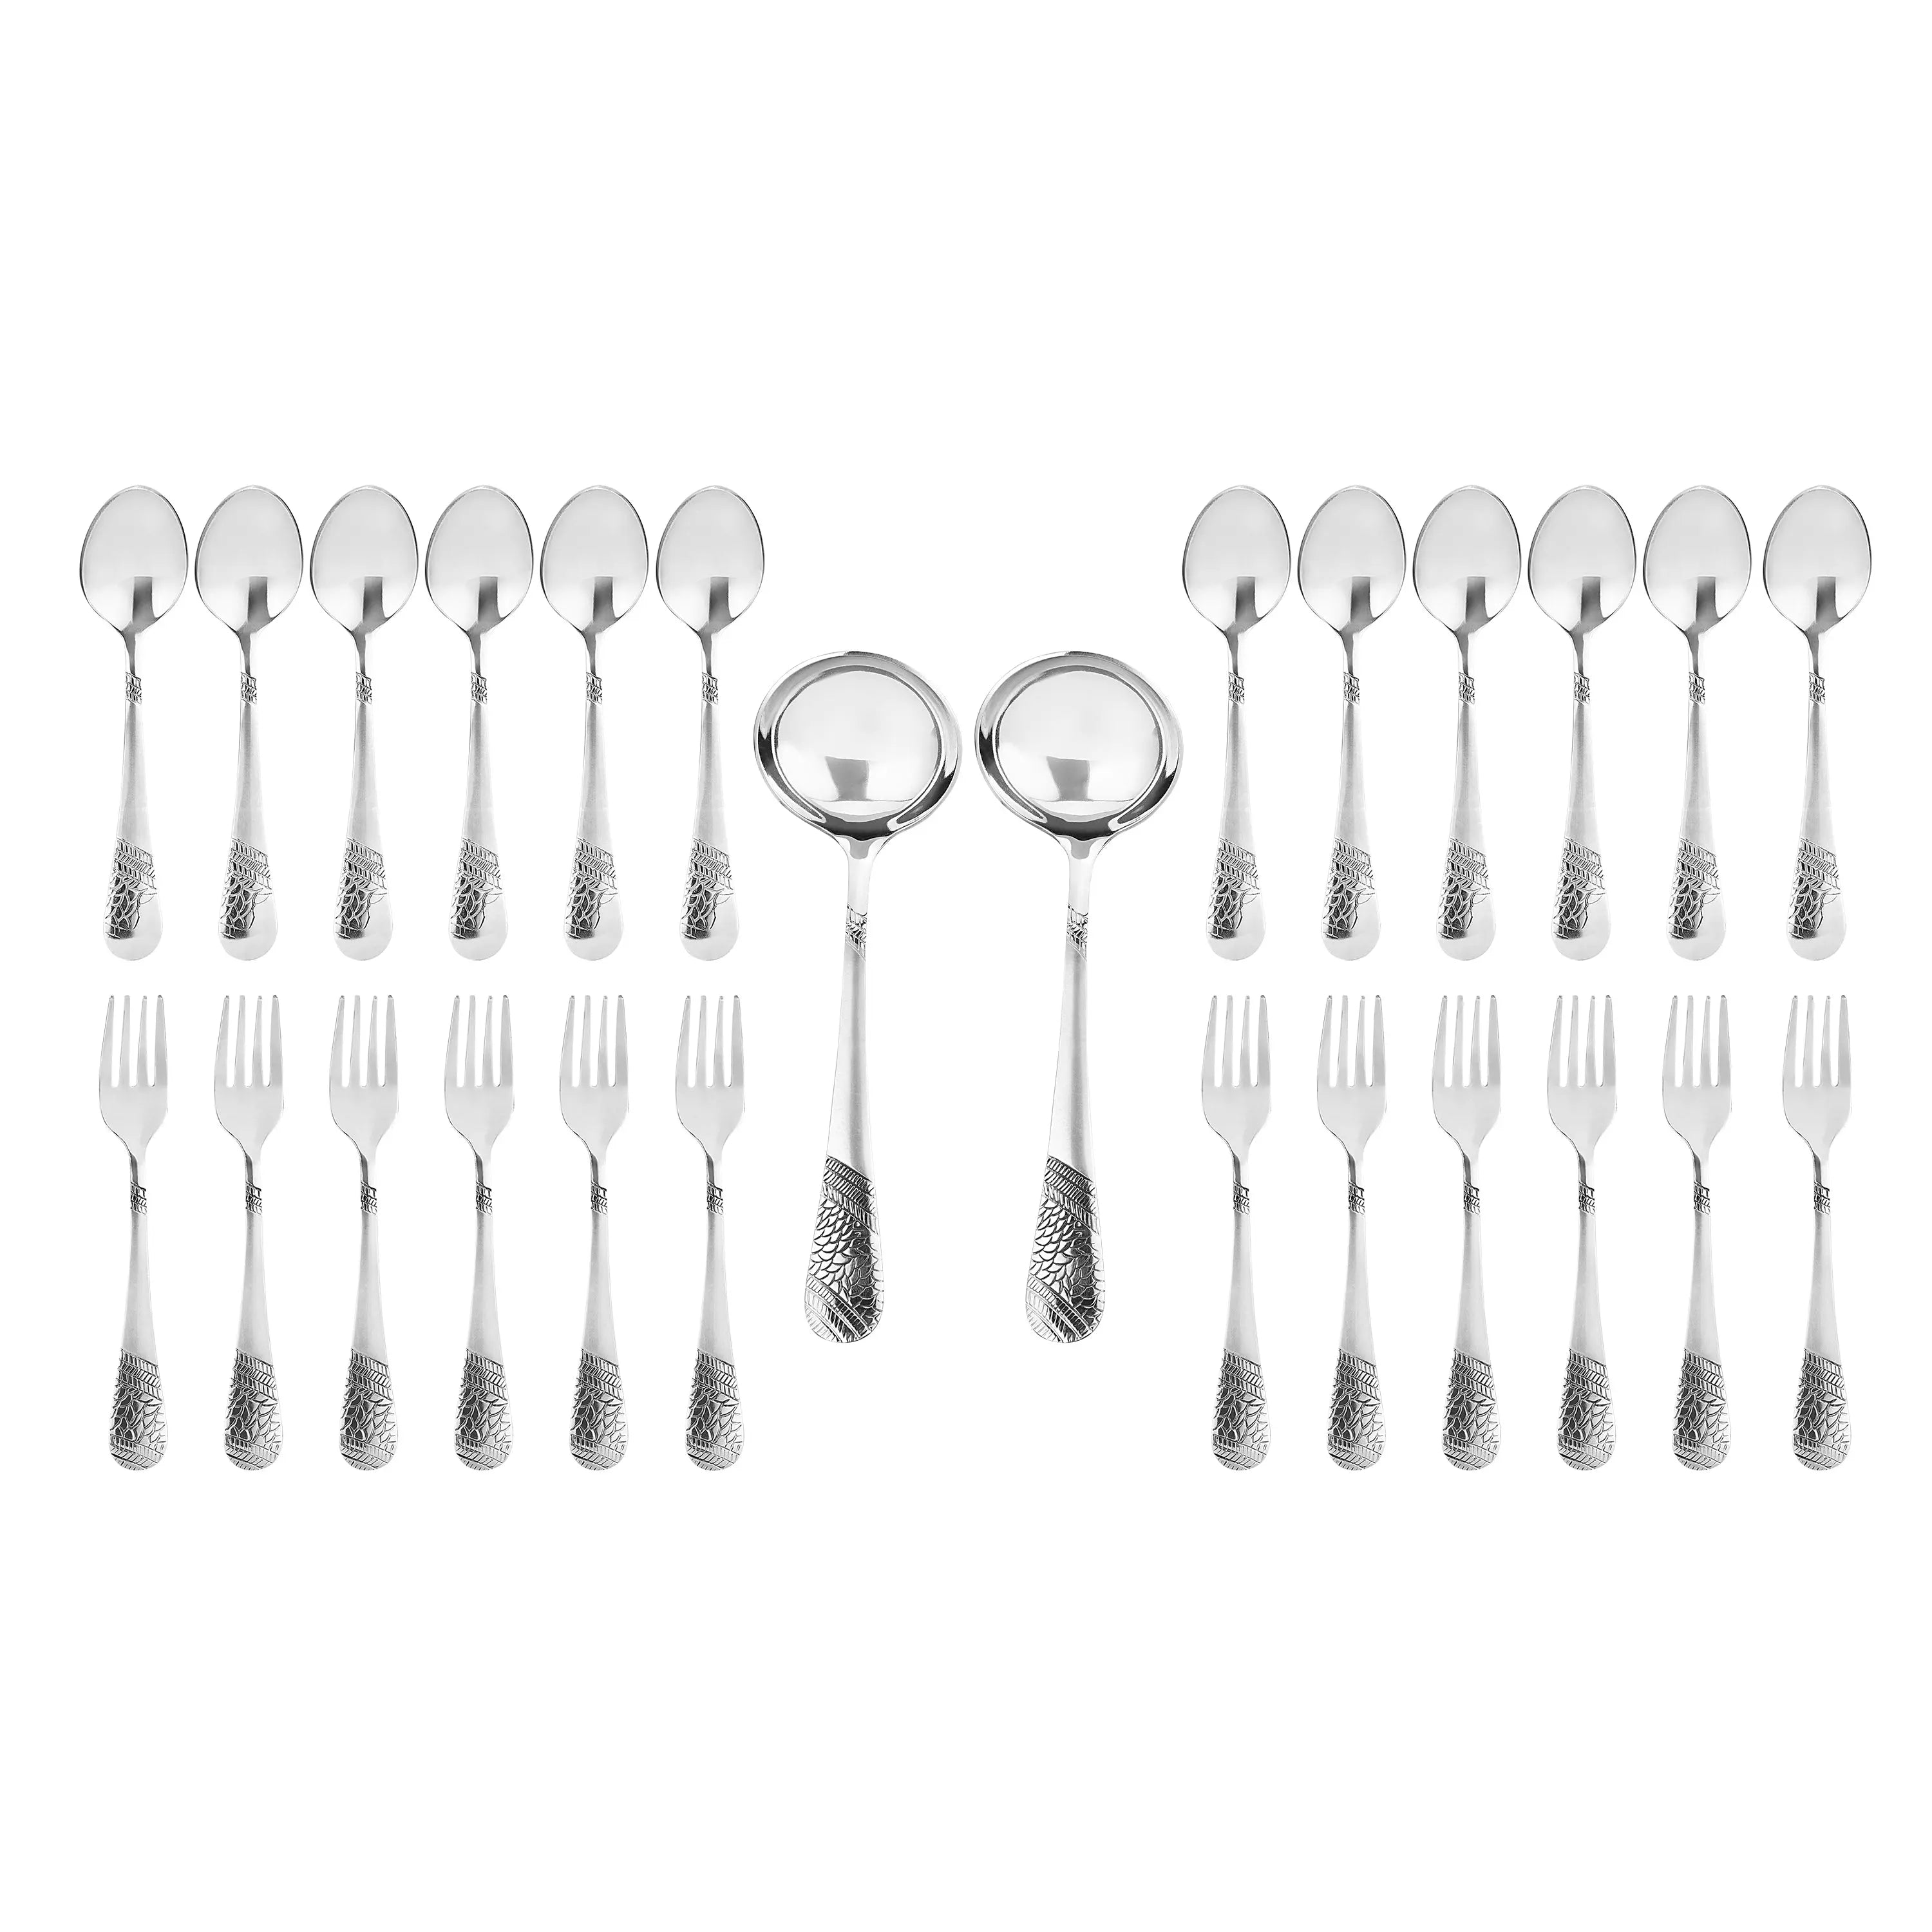 STAINLESS STEEL CUTTLERY 12 G SET -26 PCS WITH VELVET BOX - CROCKERY WALA AND COMPANY 